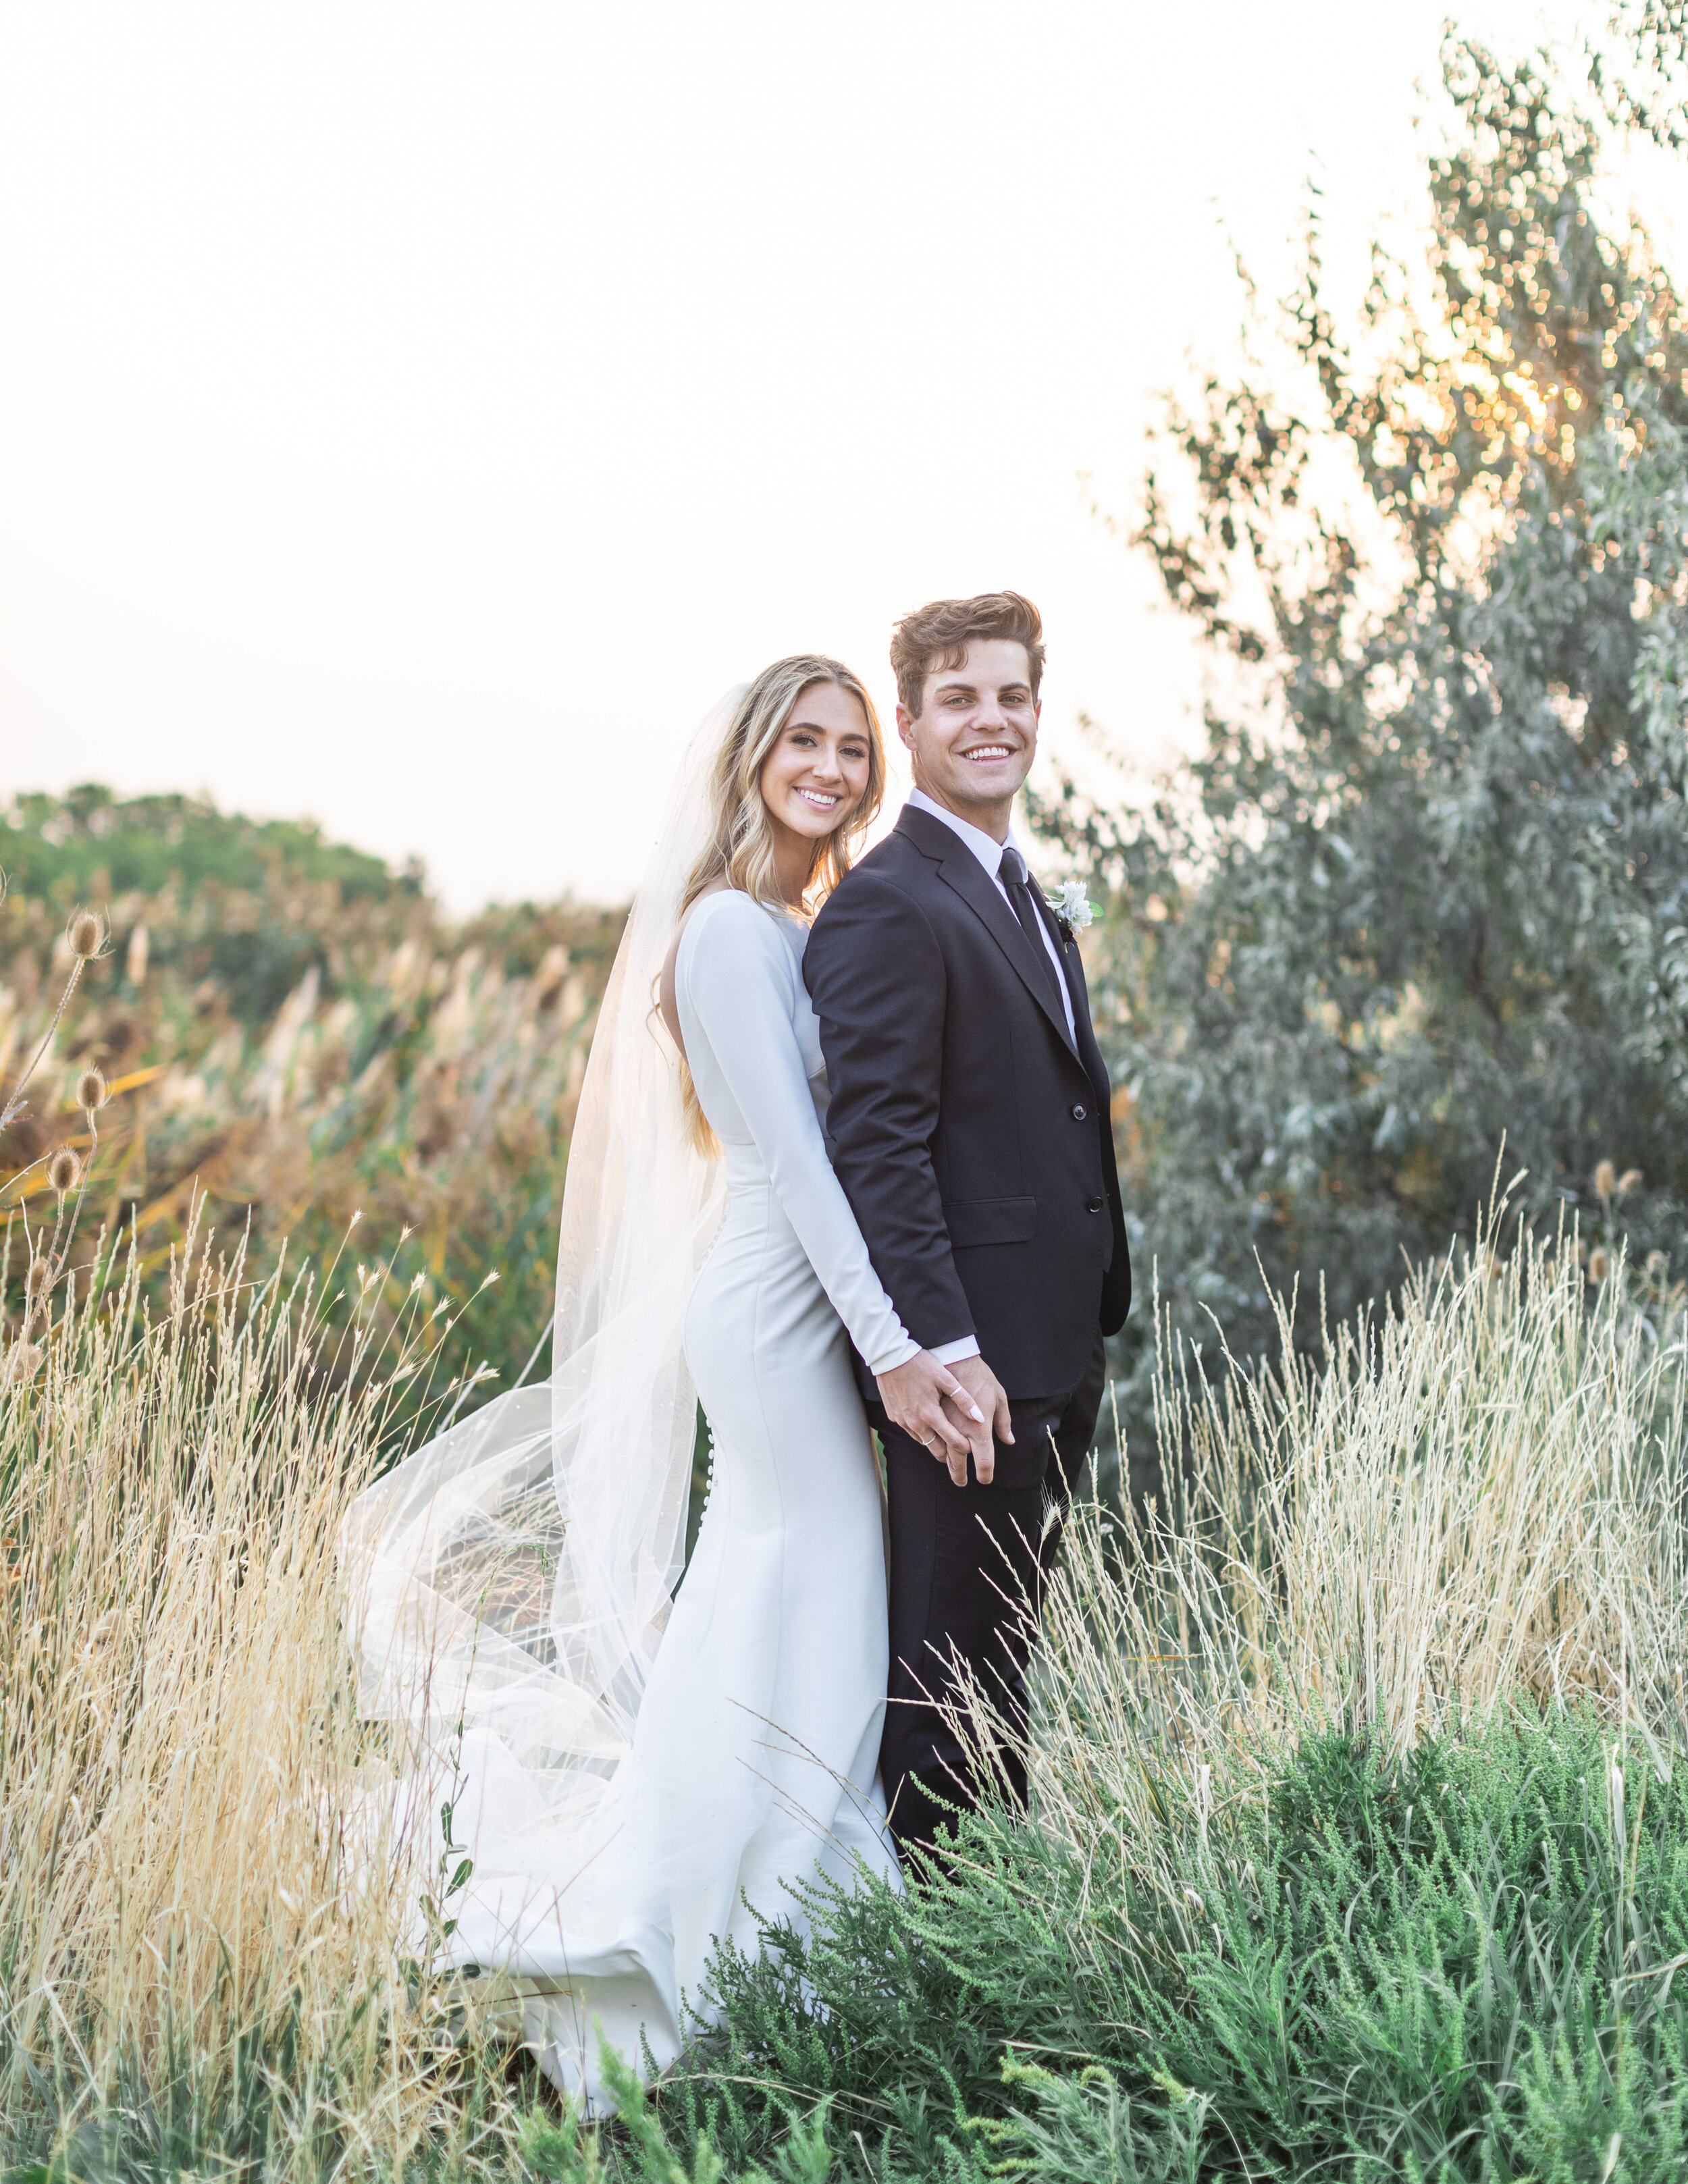  A Salt Lake City photographer captures a bride and groom holding hands and smiling at sunset in a yellow grass field with the bride's veil blowing in the wind captured by Savanna Richardson Photography. Golden sunset backlighting on photos dreamy ut